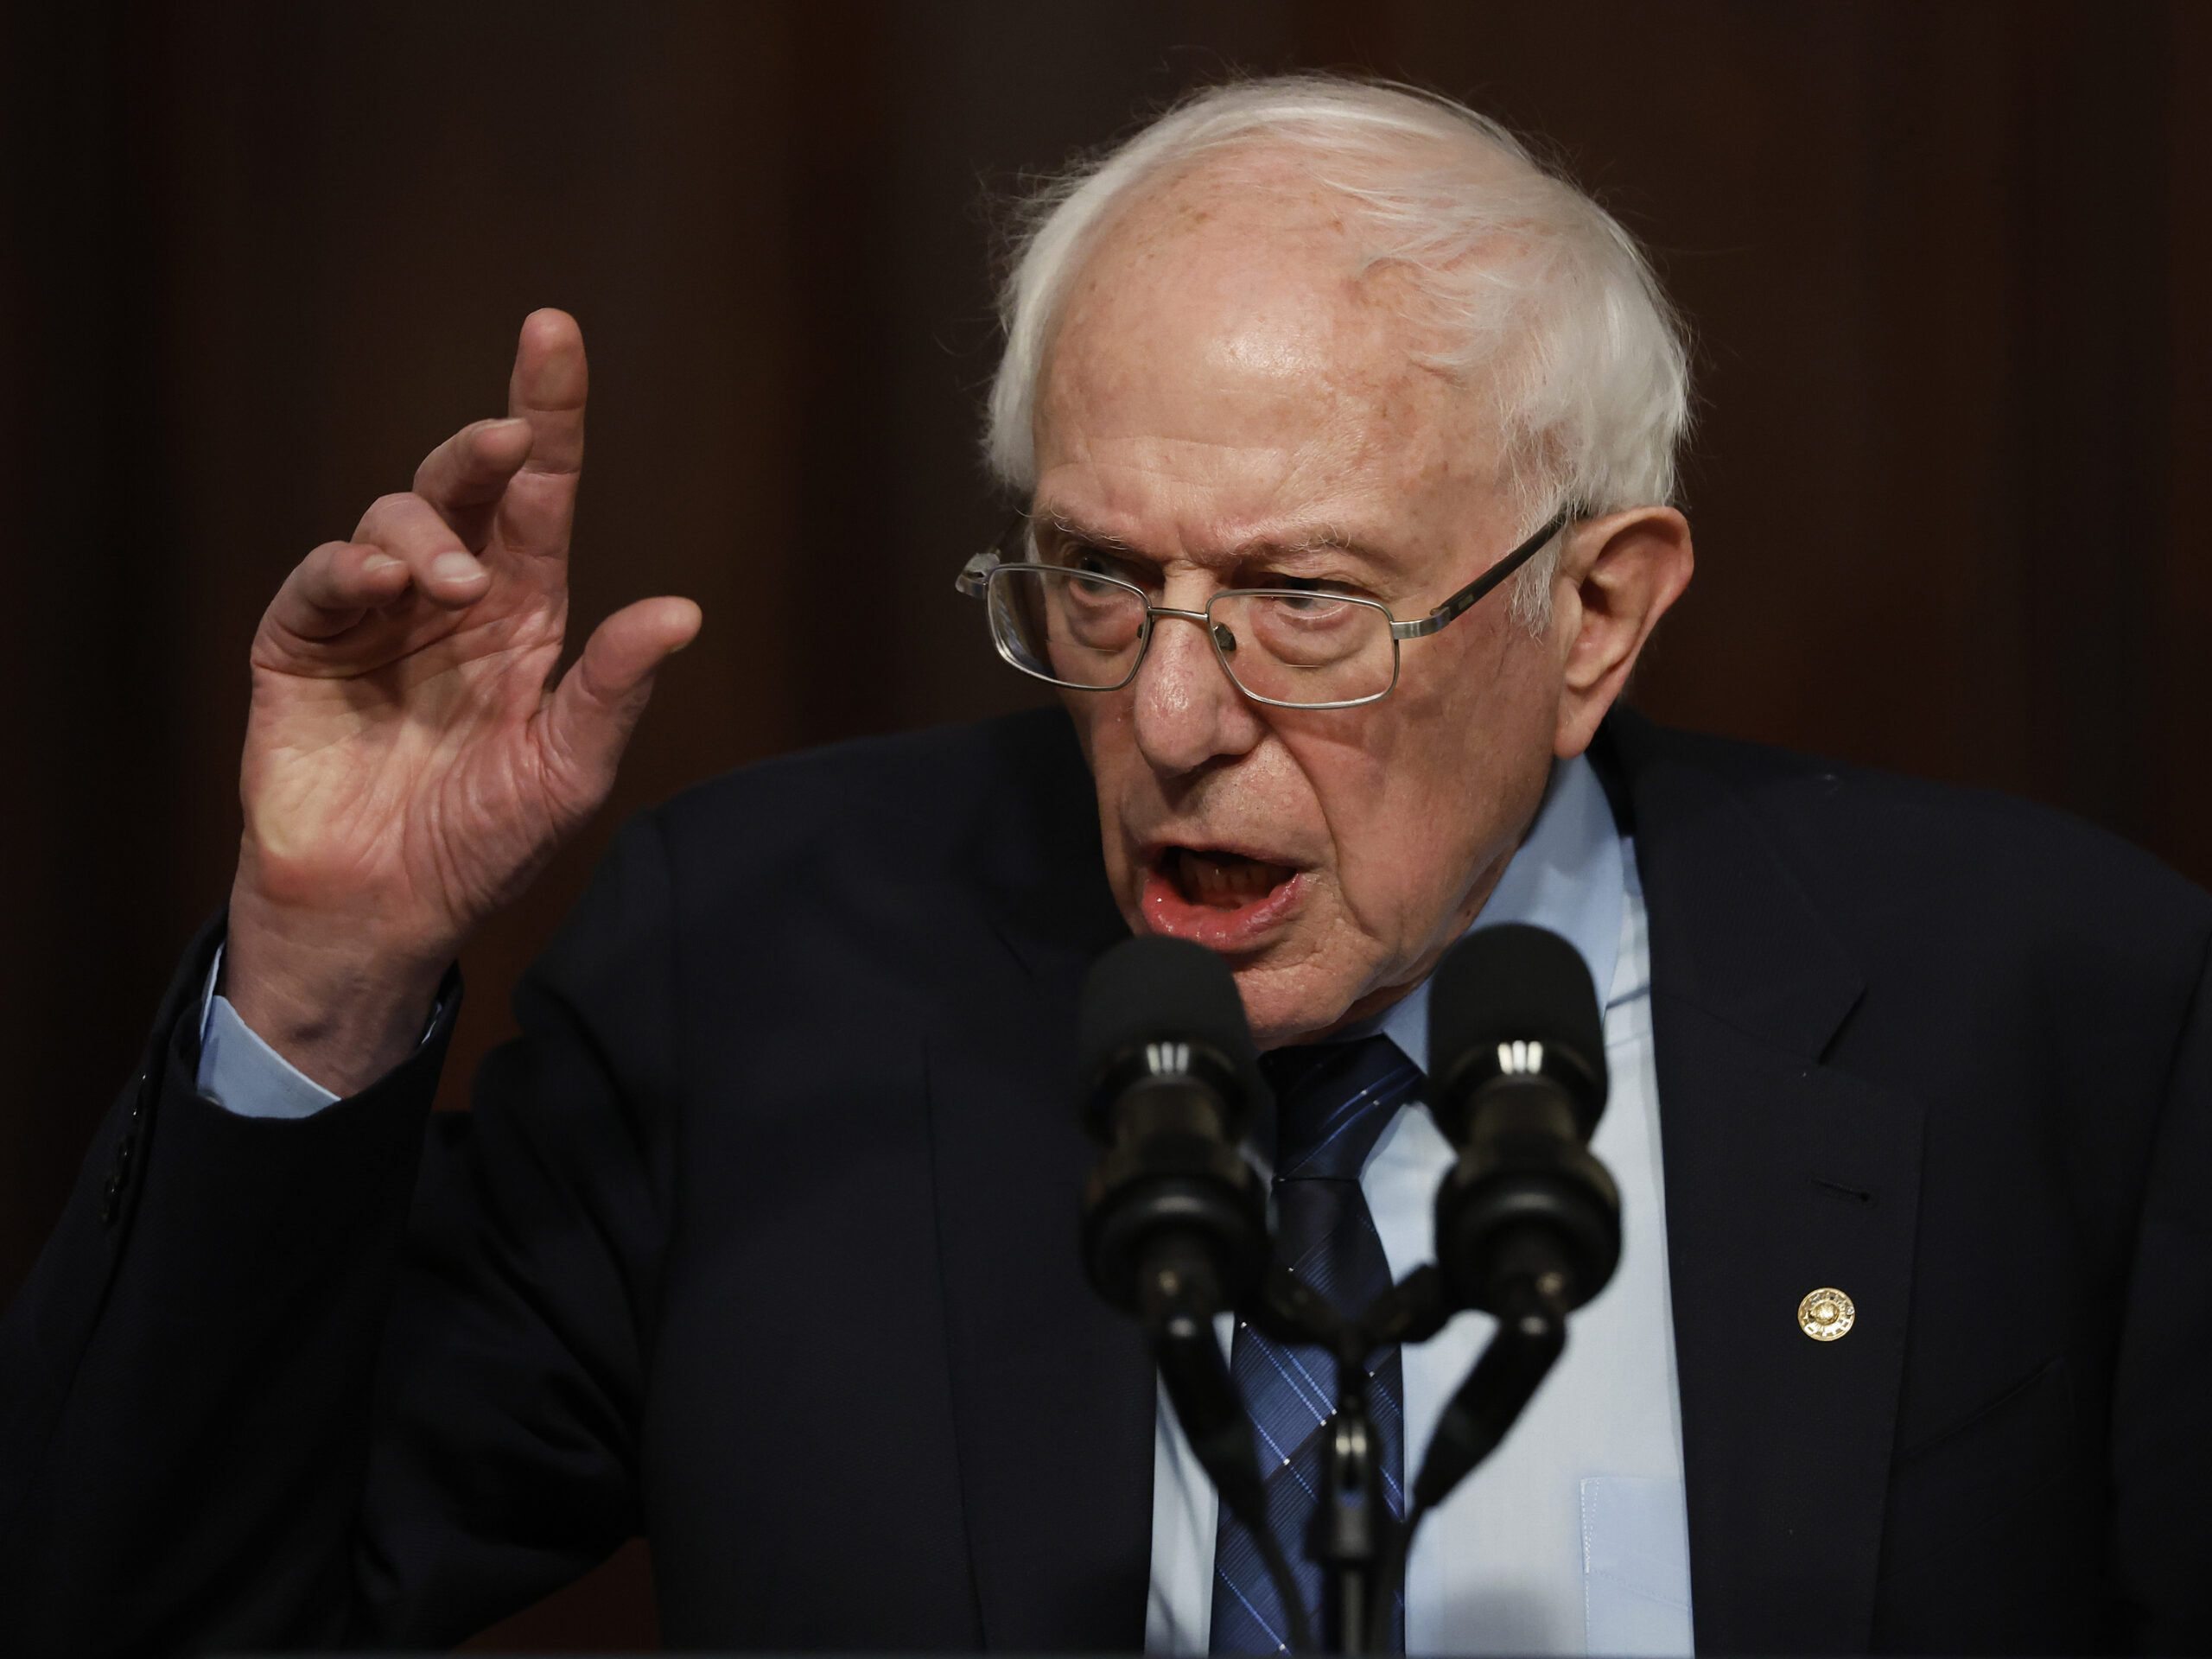 Bernie Sanders says Netanyahu is attacking campus protests to deflect war criticism